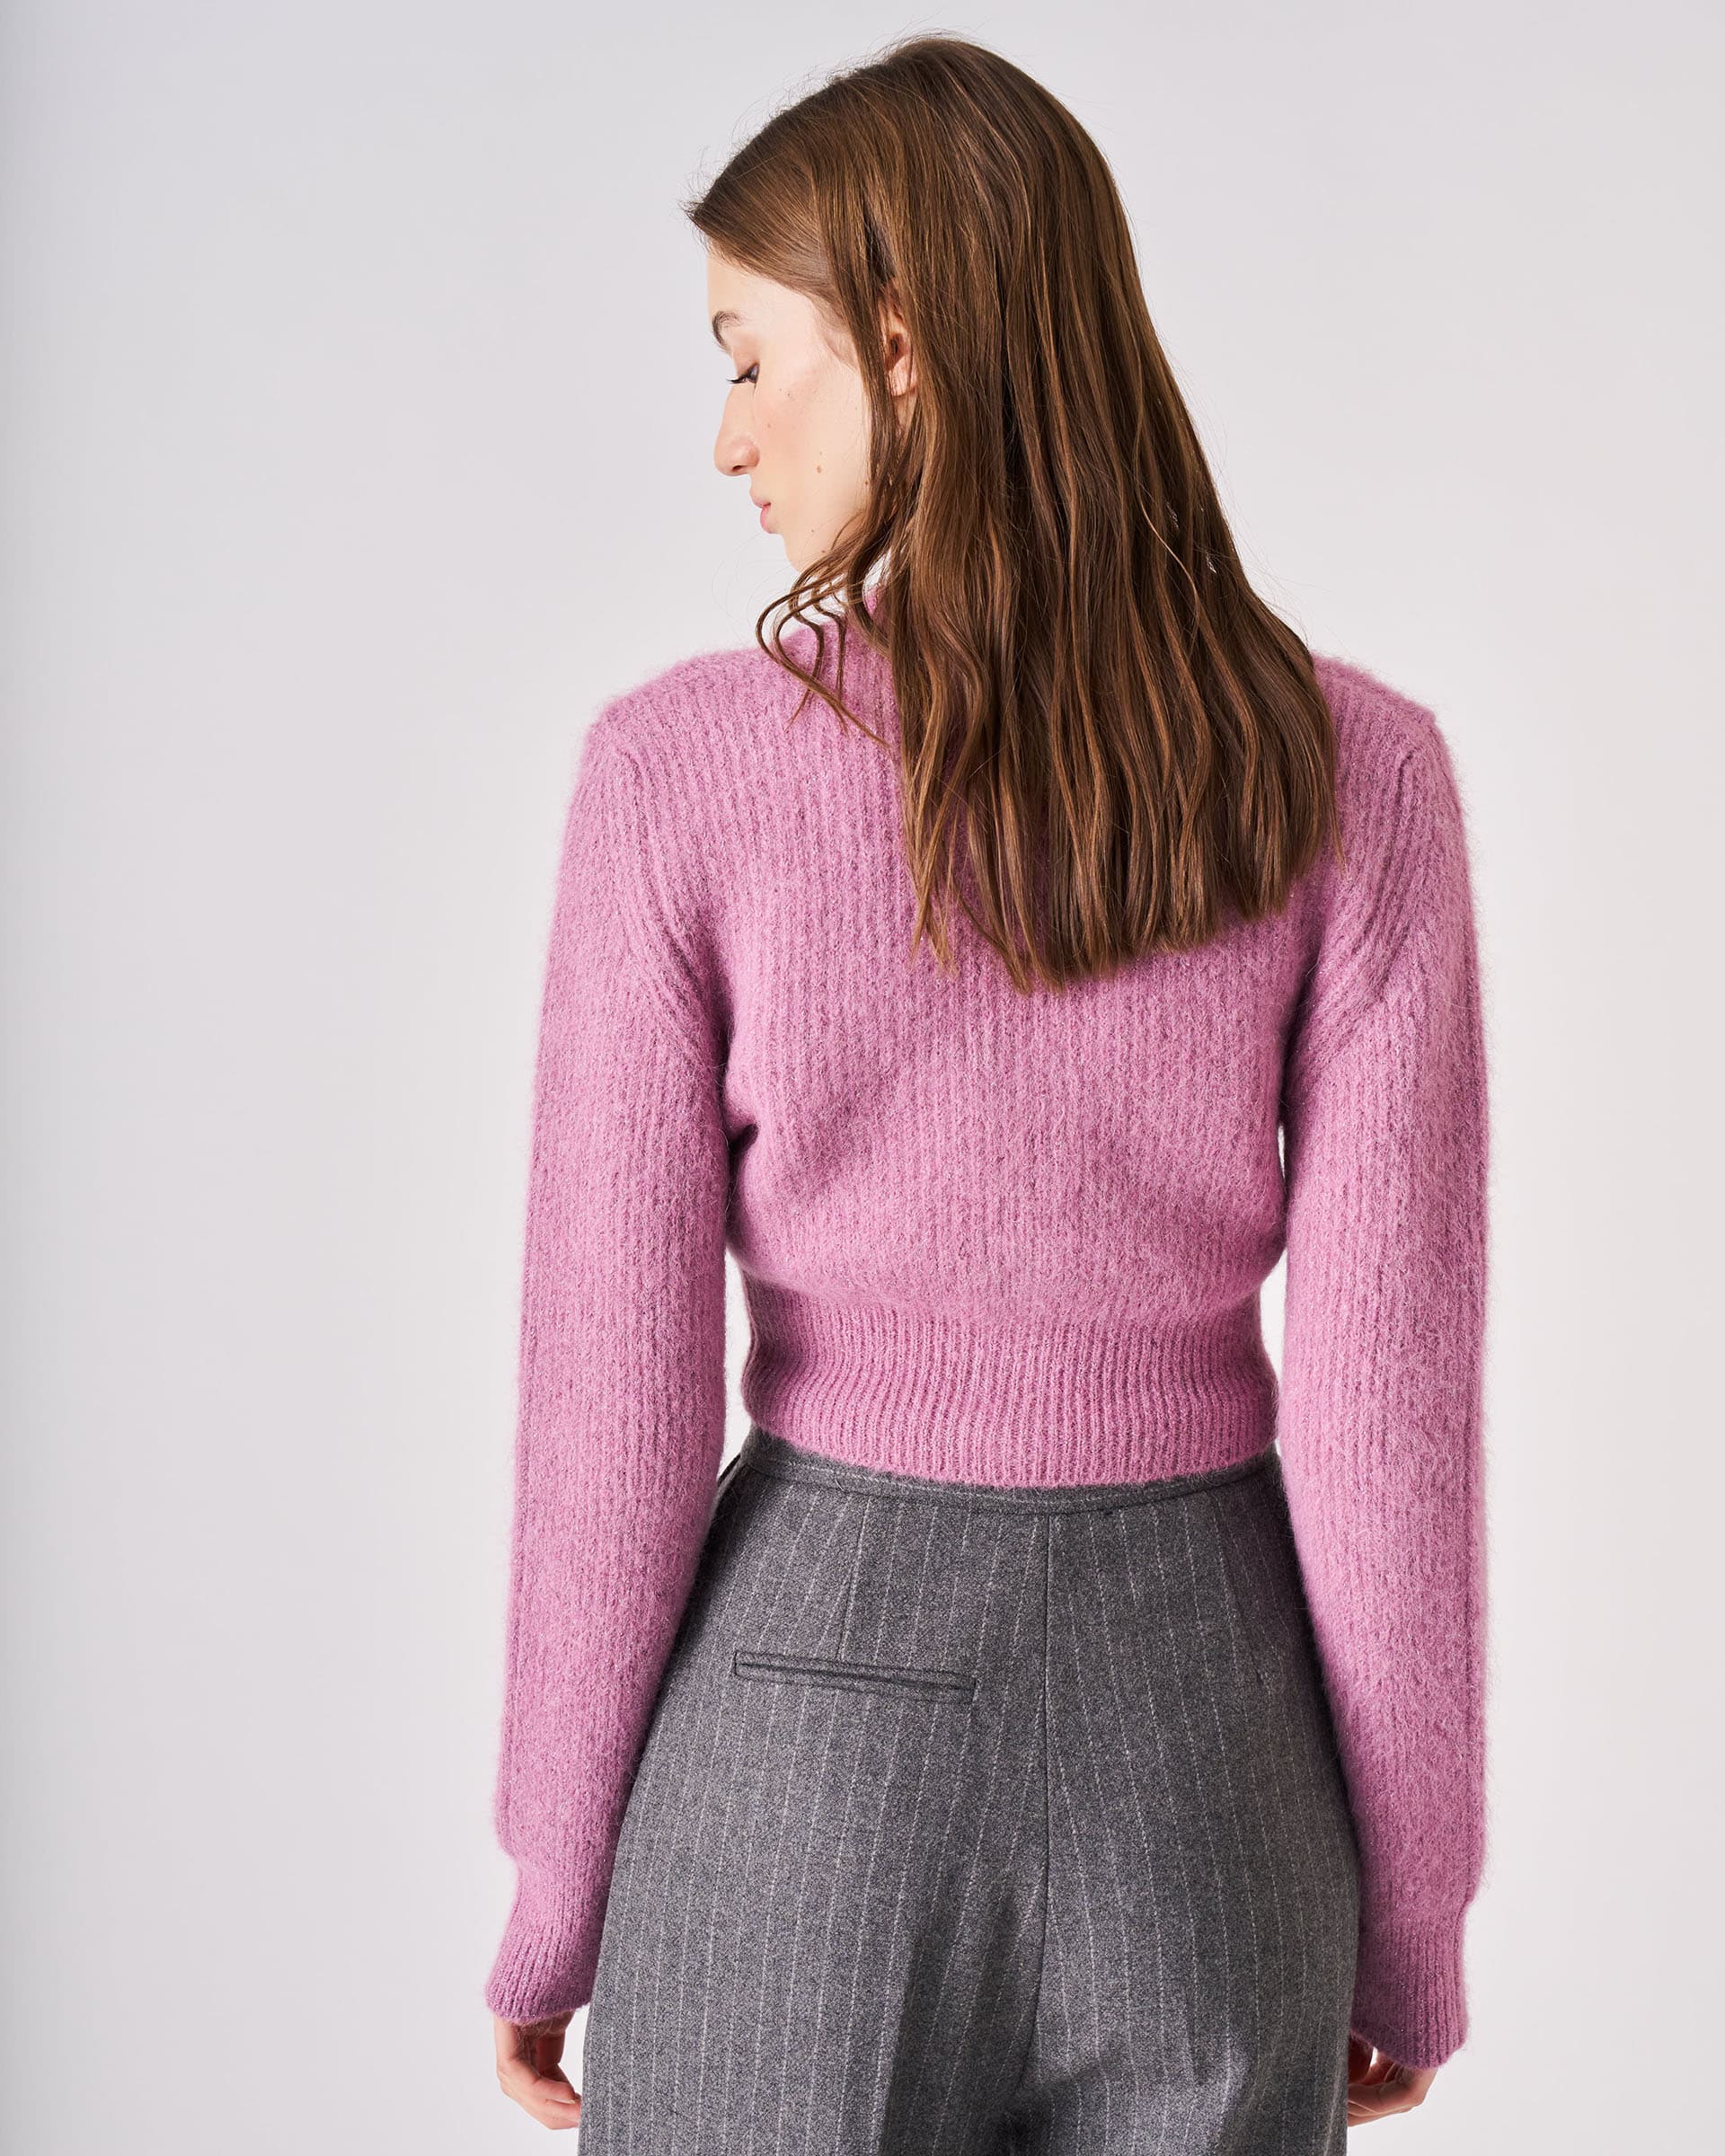 The Market Store | Short Knitted Jacket